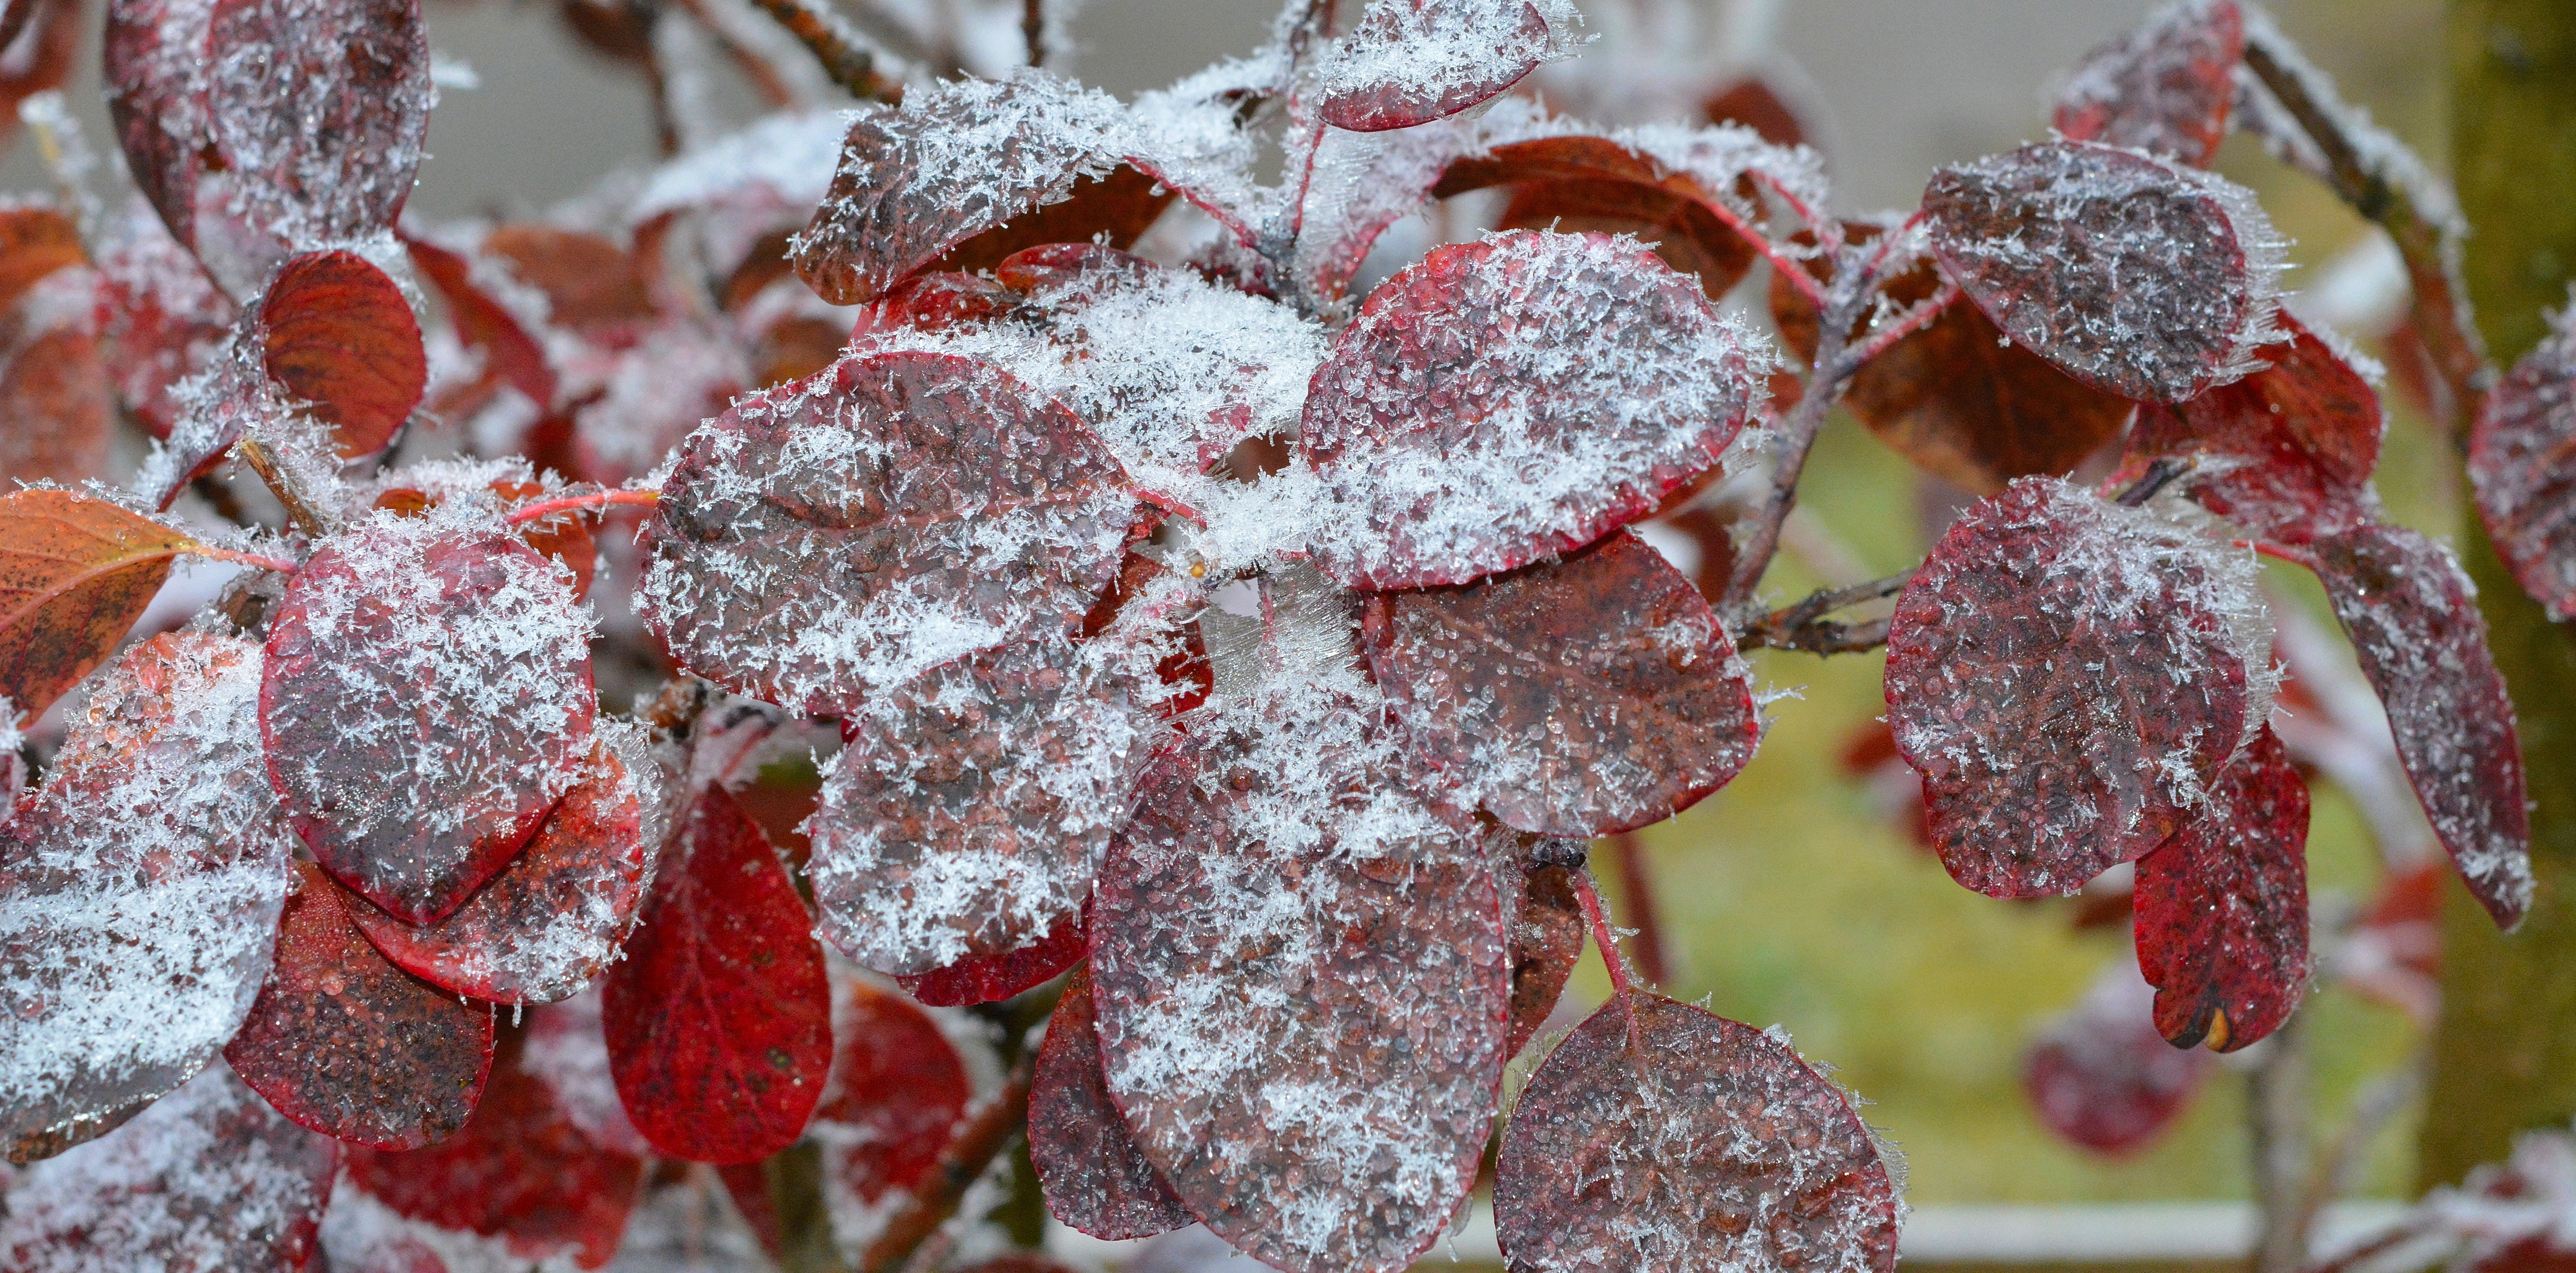 judas tree, leaves, frozen, outdoors, no people, day, close-up